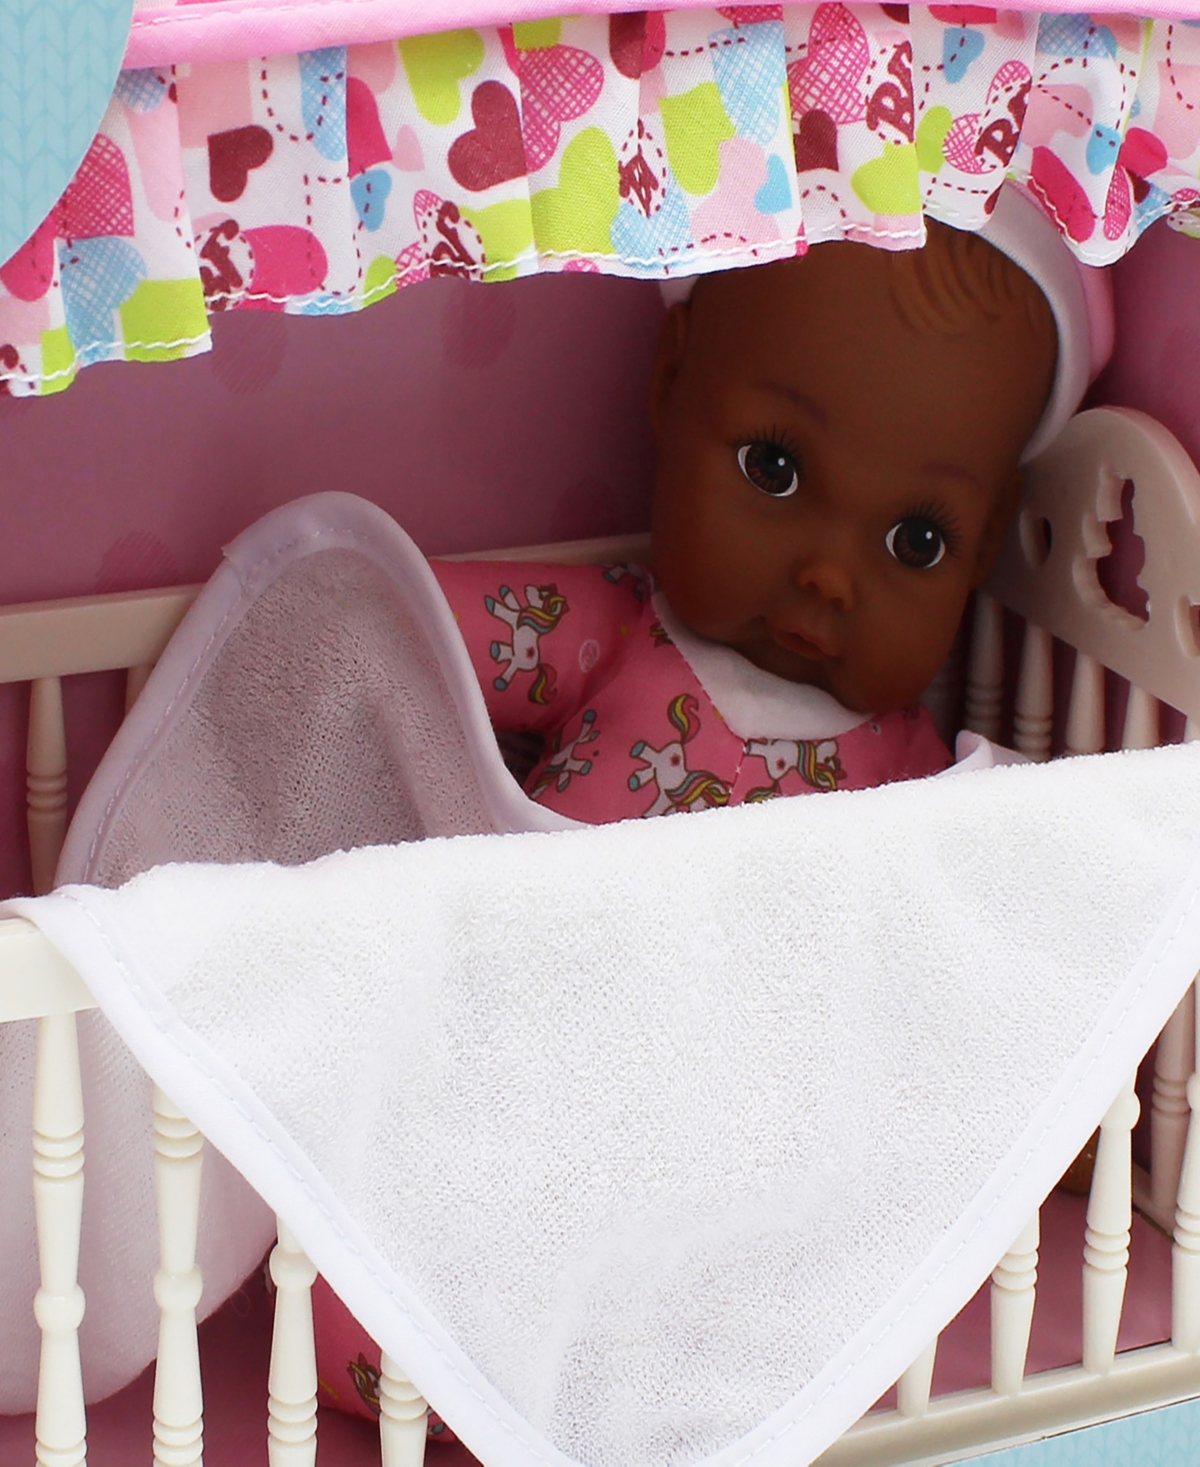 Shop Baby's First By Nemcor Goldberger Doll Canopy Crib With 9" Doll African-american In Multi